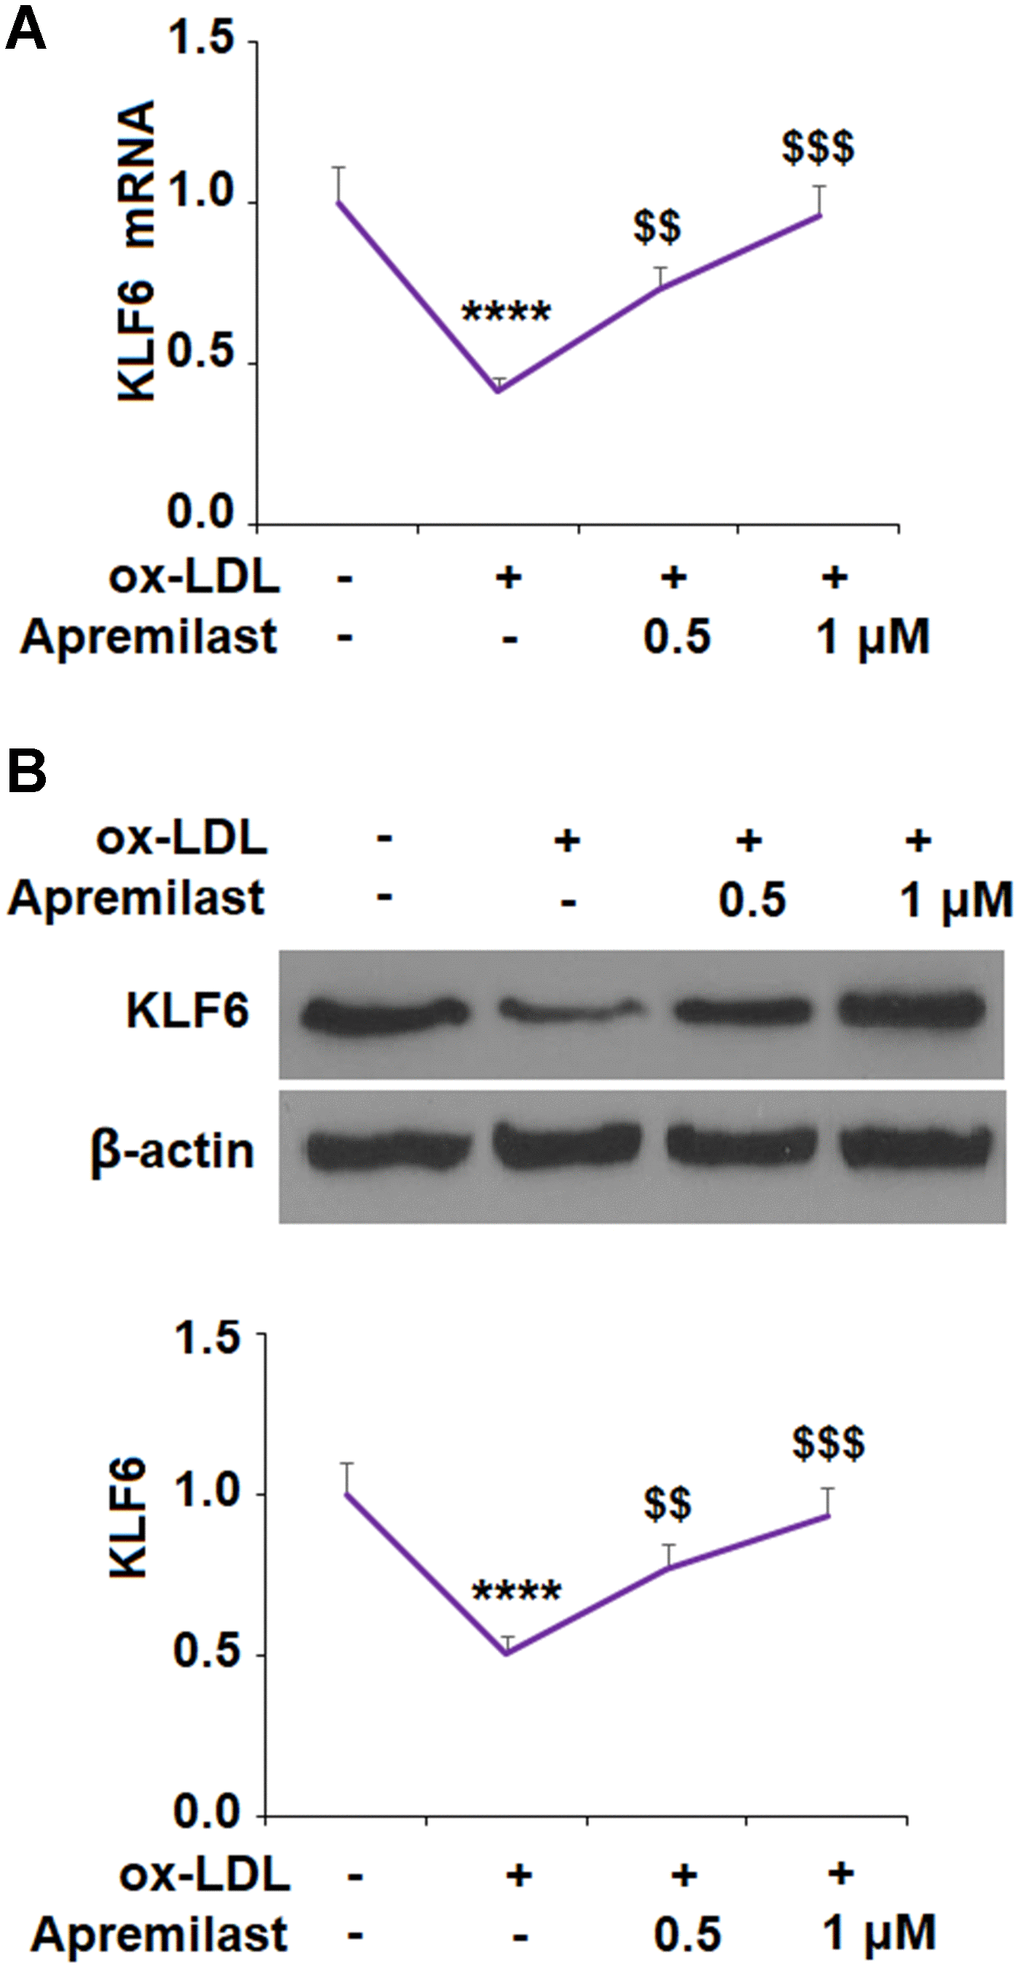 Apremilast ameliorated ox-LDL-induced reduction of KLF6 in human umbilical vein endothelial cells (HUVECs). Cells were treated with ox-LDL (100 μg/mL) in the presence or absence of apremilast (0.5, 1 μM) for 24 h. (A) mRNA of KLF6; (B) Protein of KLF6 (*, #, $, P